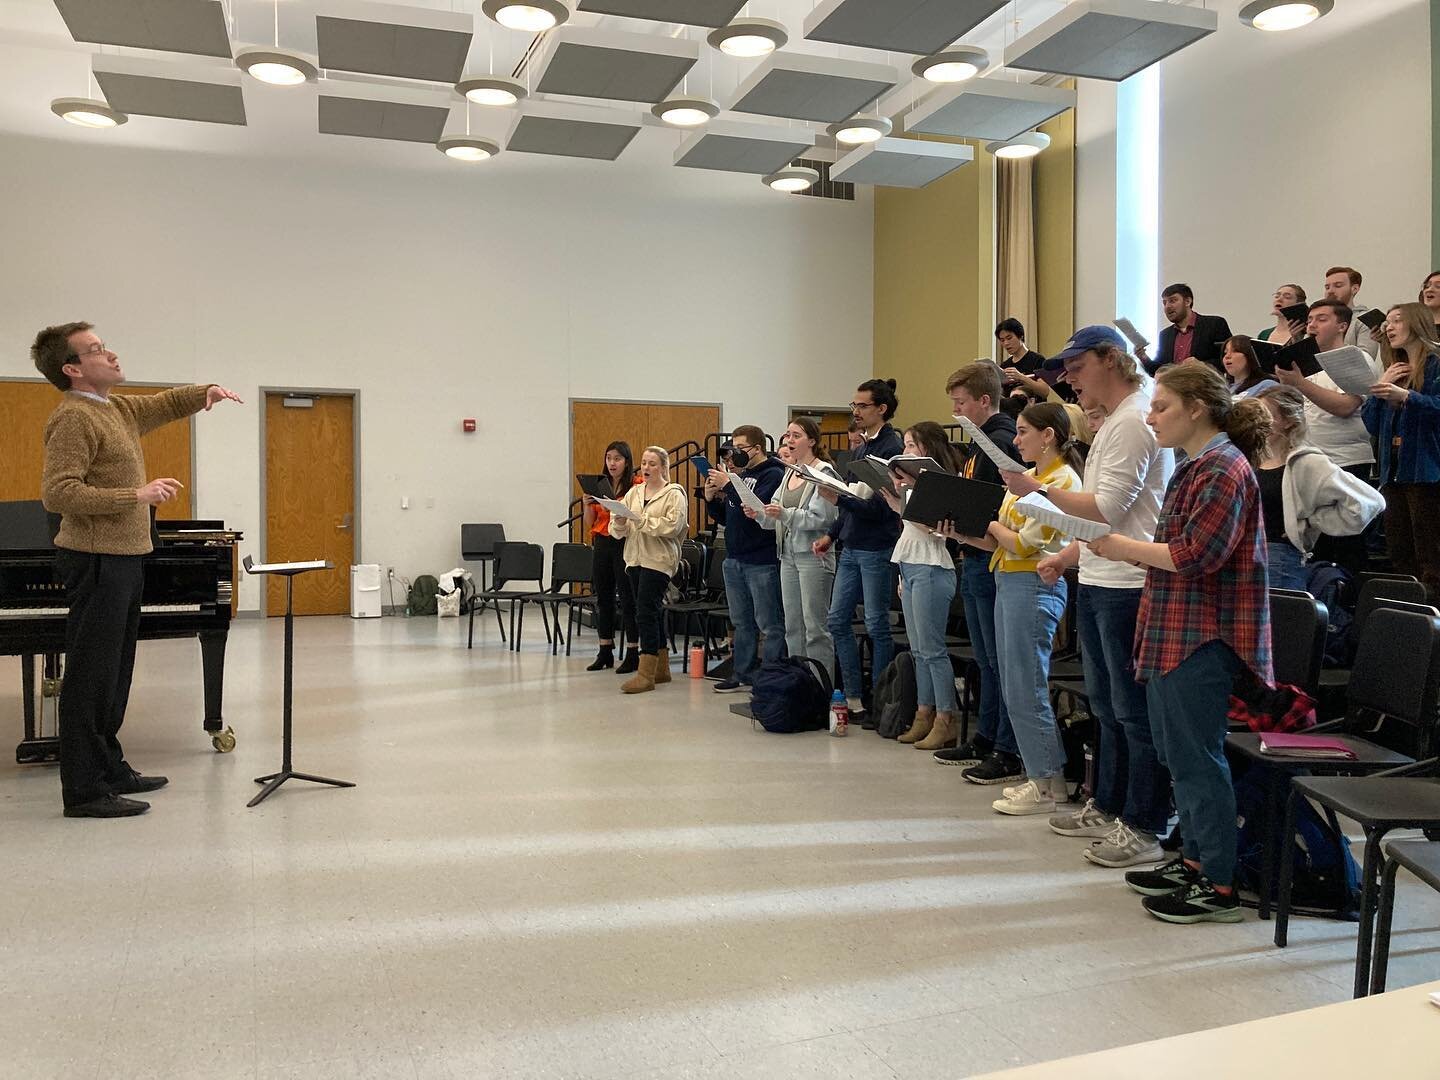 Having an excellent time with the Penn State Concert Choir, as they perform my &lsquo;Invitation to Love.&rsquo; Beautiful singing! #pennstate #psu #choralmusic #choir #newmusic #composerlife